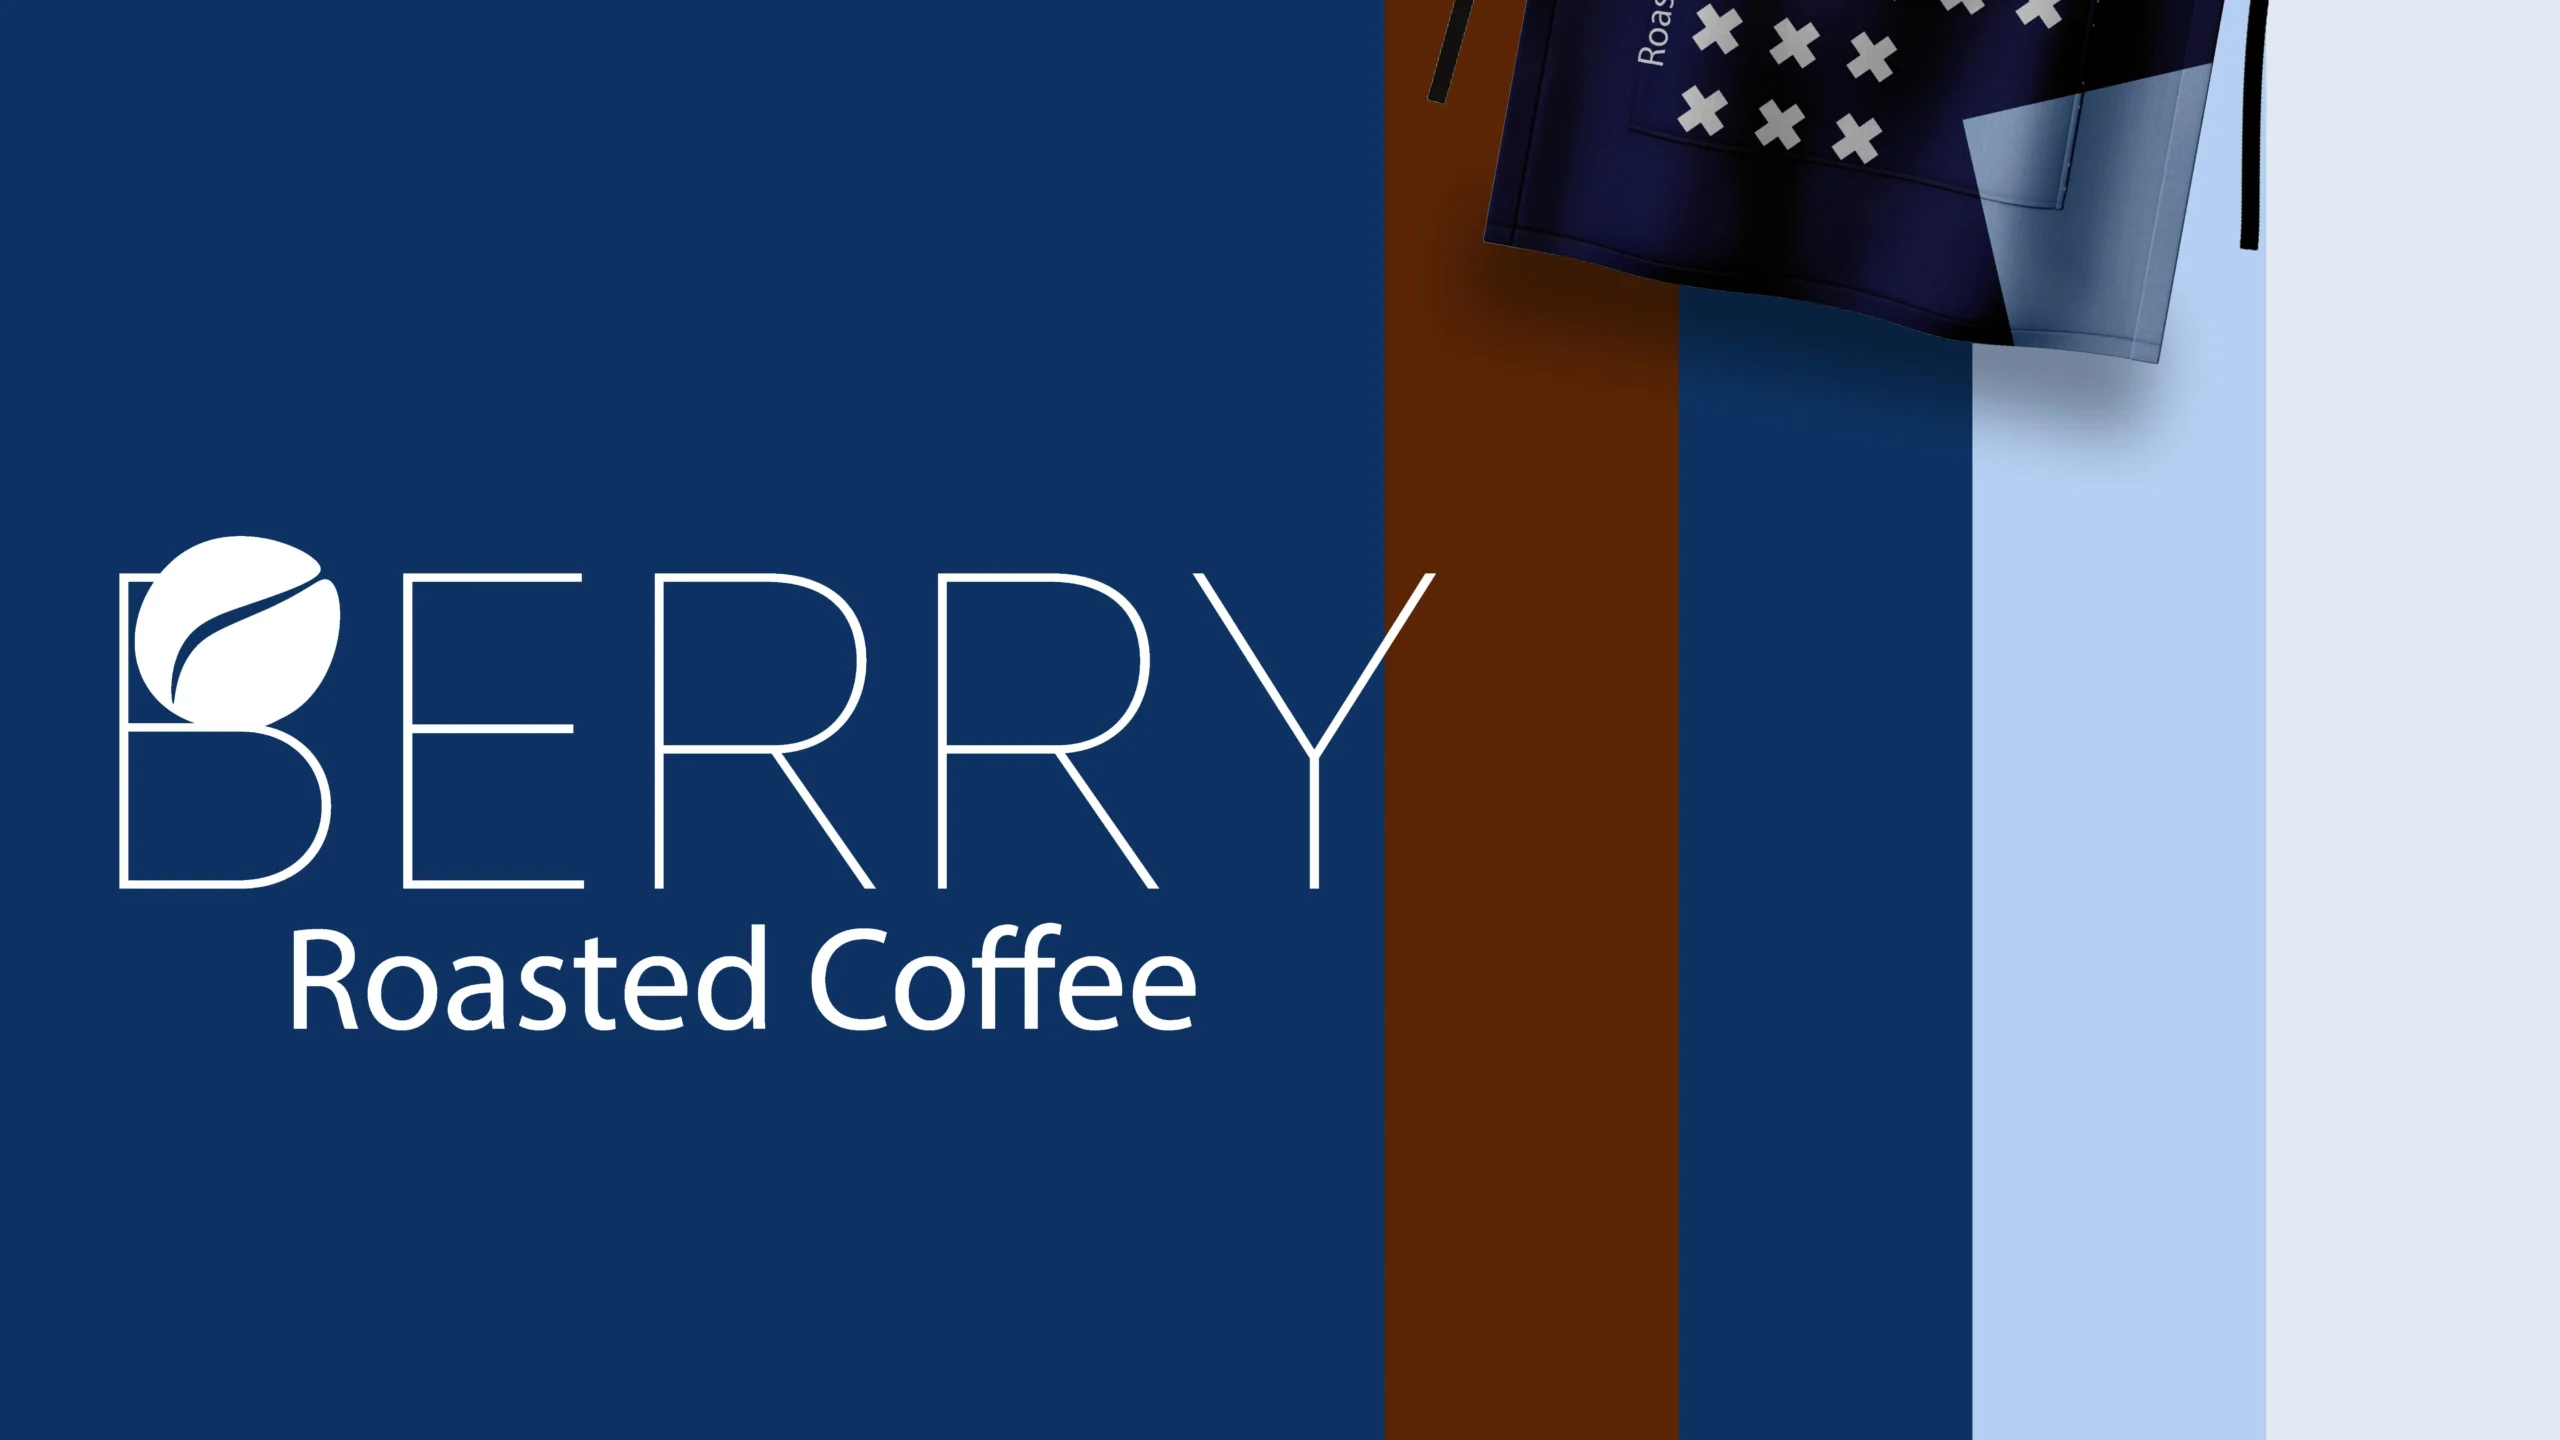 Array of Berry coffee products, highlighting different blends and flavors